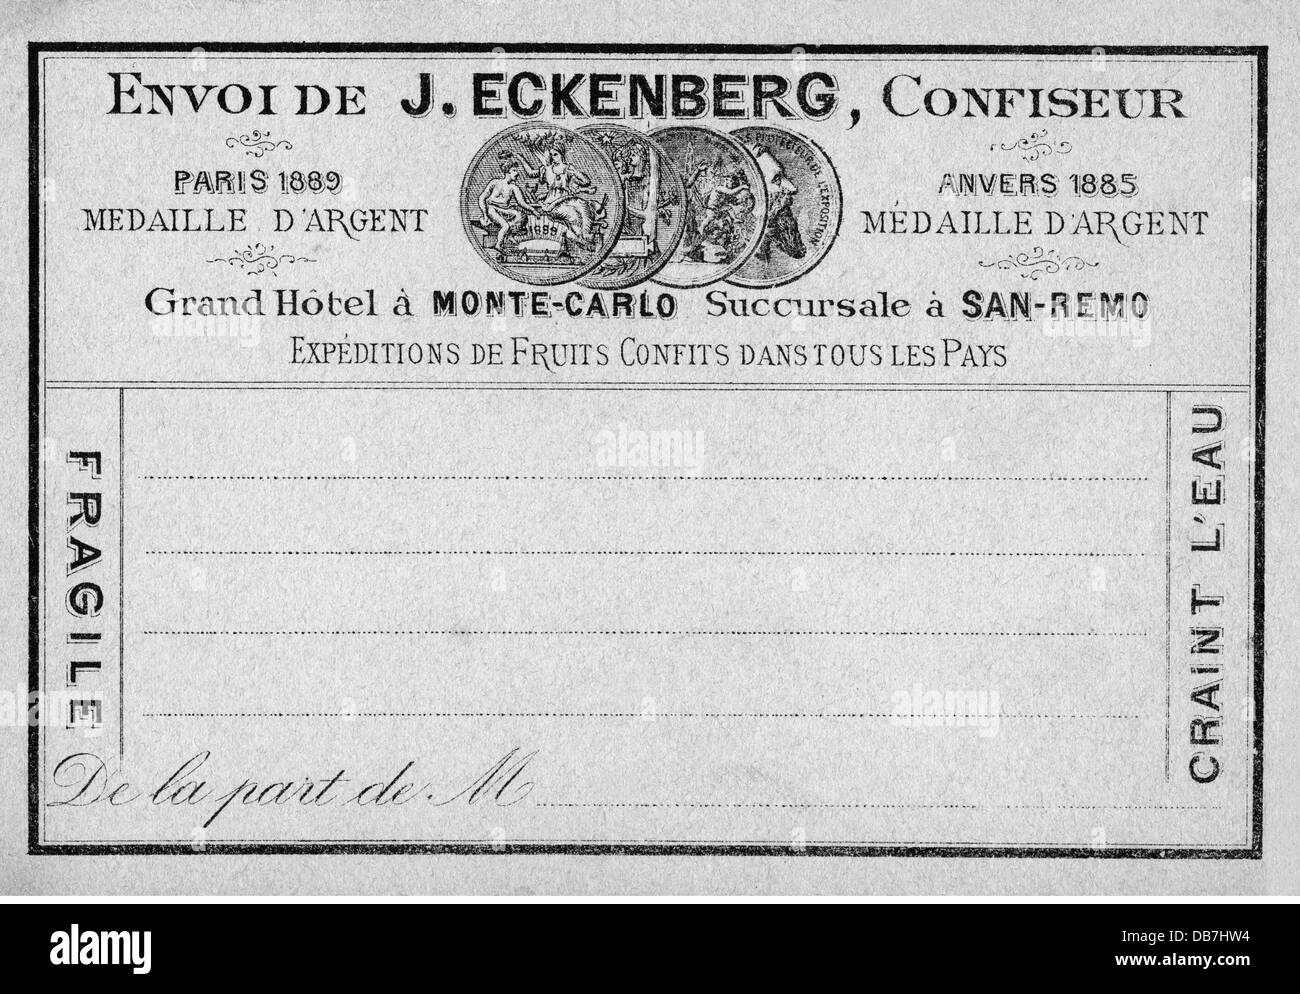 trade, food, pastries, insert for shipment of products by J. Eckenberg, Monte Carlo, late 19th century, gastronomy, patisserie, graphic, graphics, medal, medals, award winner, prize winner, laureate, award winners, prize winners, laureates, winner, winners, award, awards, prize, prizes, insert, inserts, card, cards, confectionary, cake shop, pastry shop, sweetmeat shop, confectionery, shipment, shipping, historic, historical, Additional-Rights-Clearences-Not Available Stock Photo